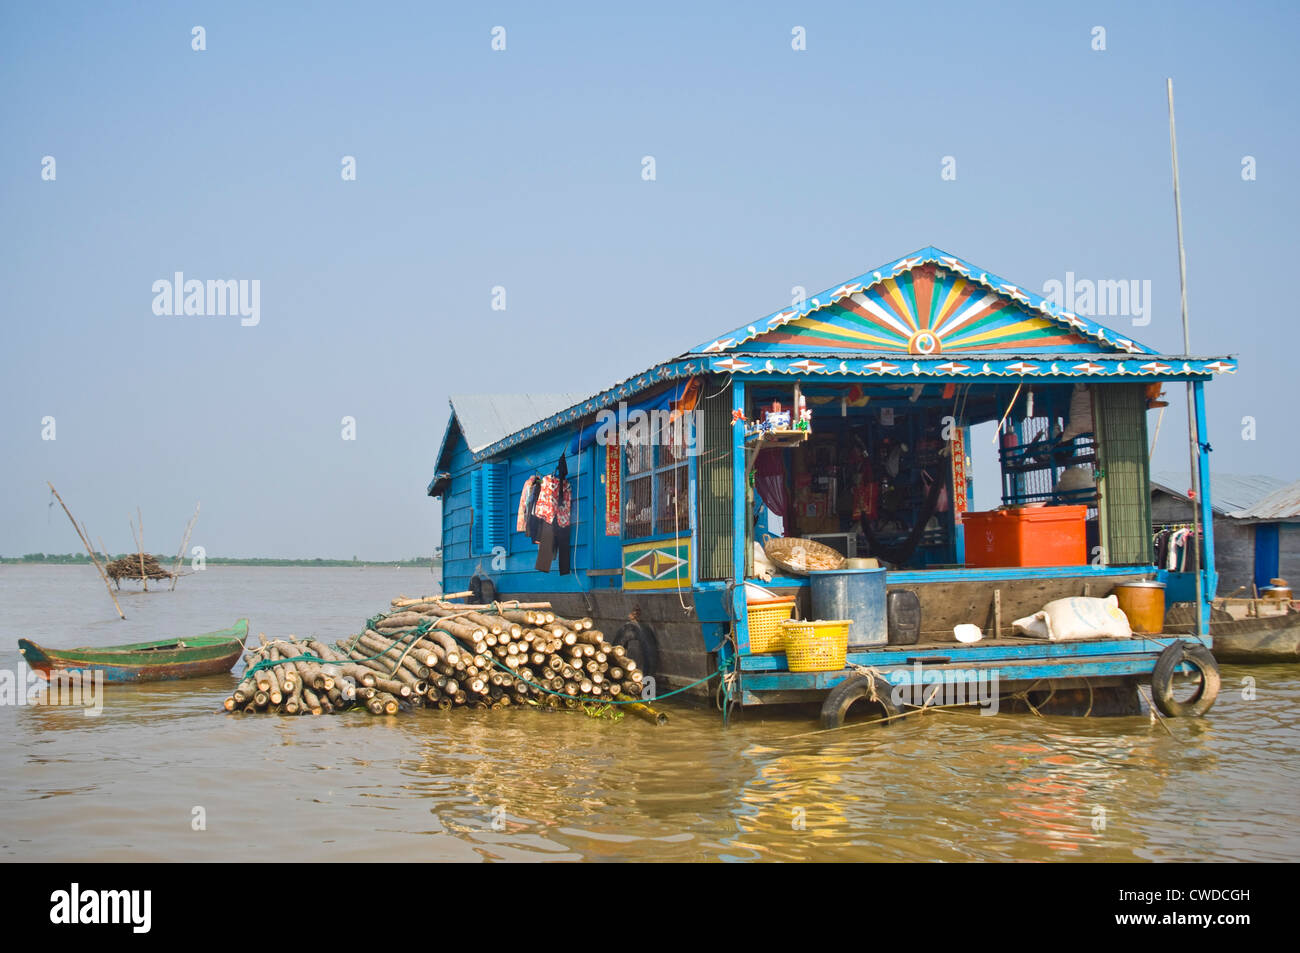 Horizontal wide angle view of the floating houses of Kompong Khleang, the floating village on Tonle Sap Lake in Cambodia Stock Photo